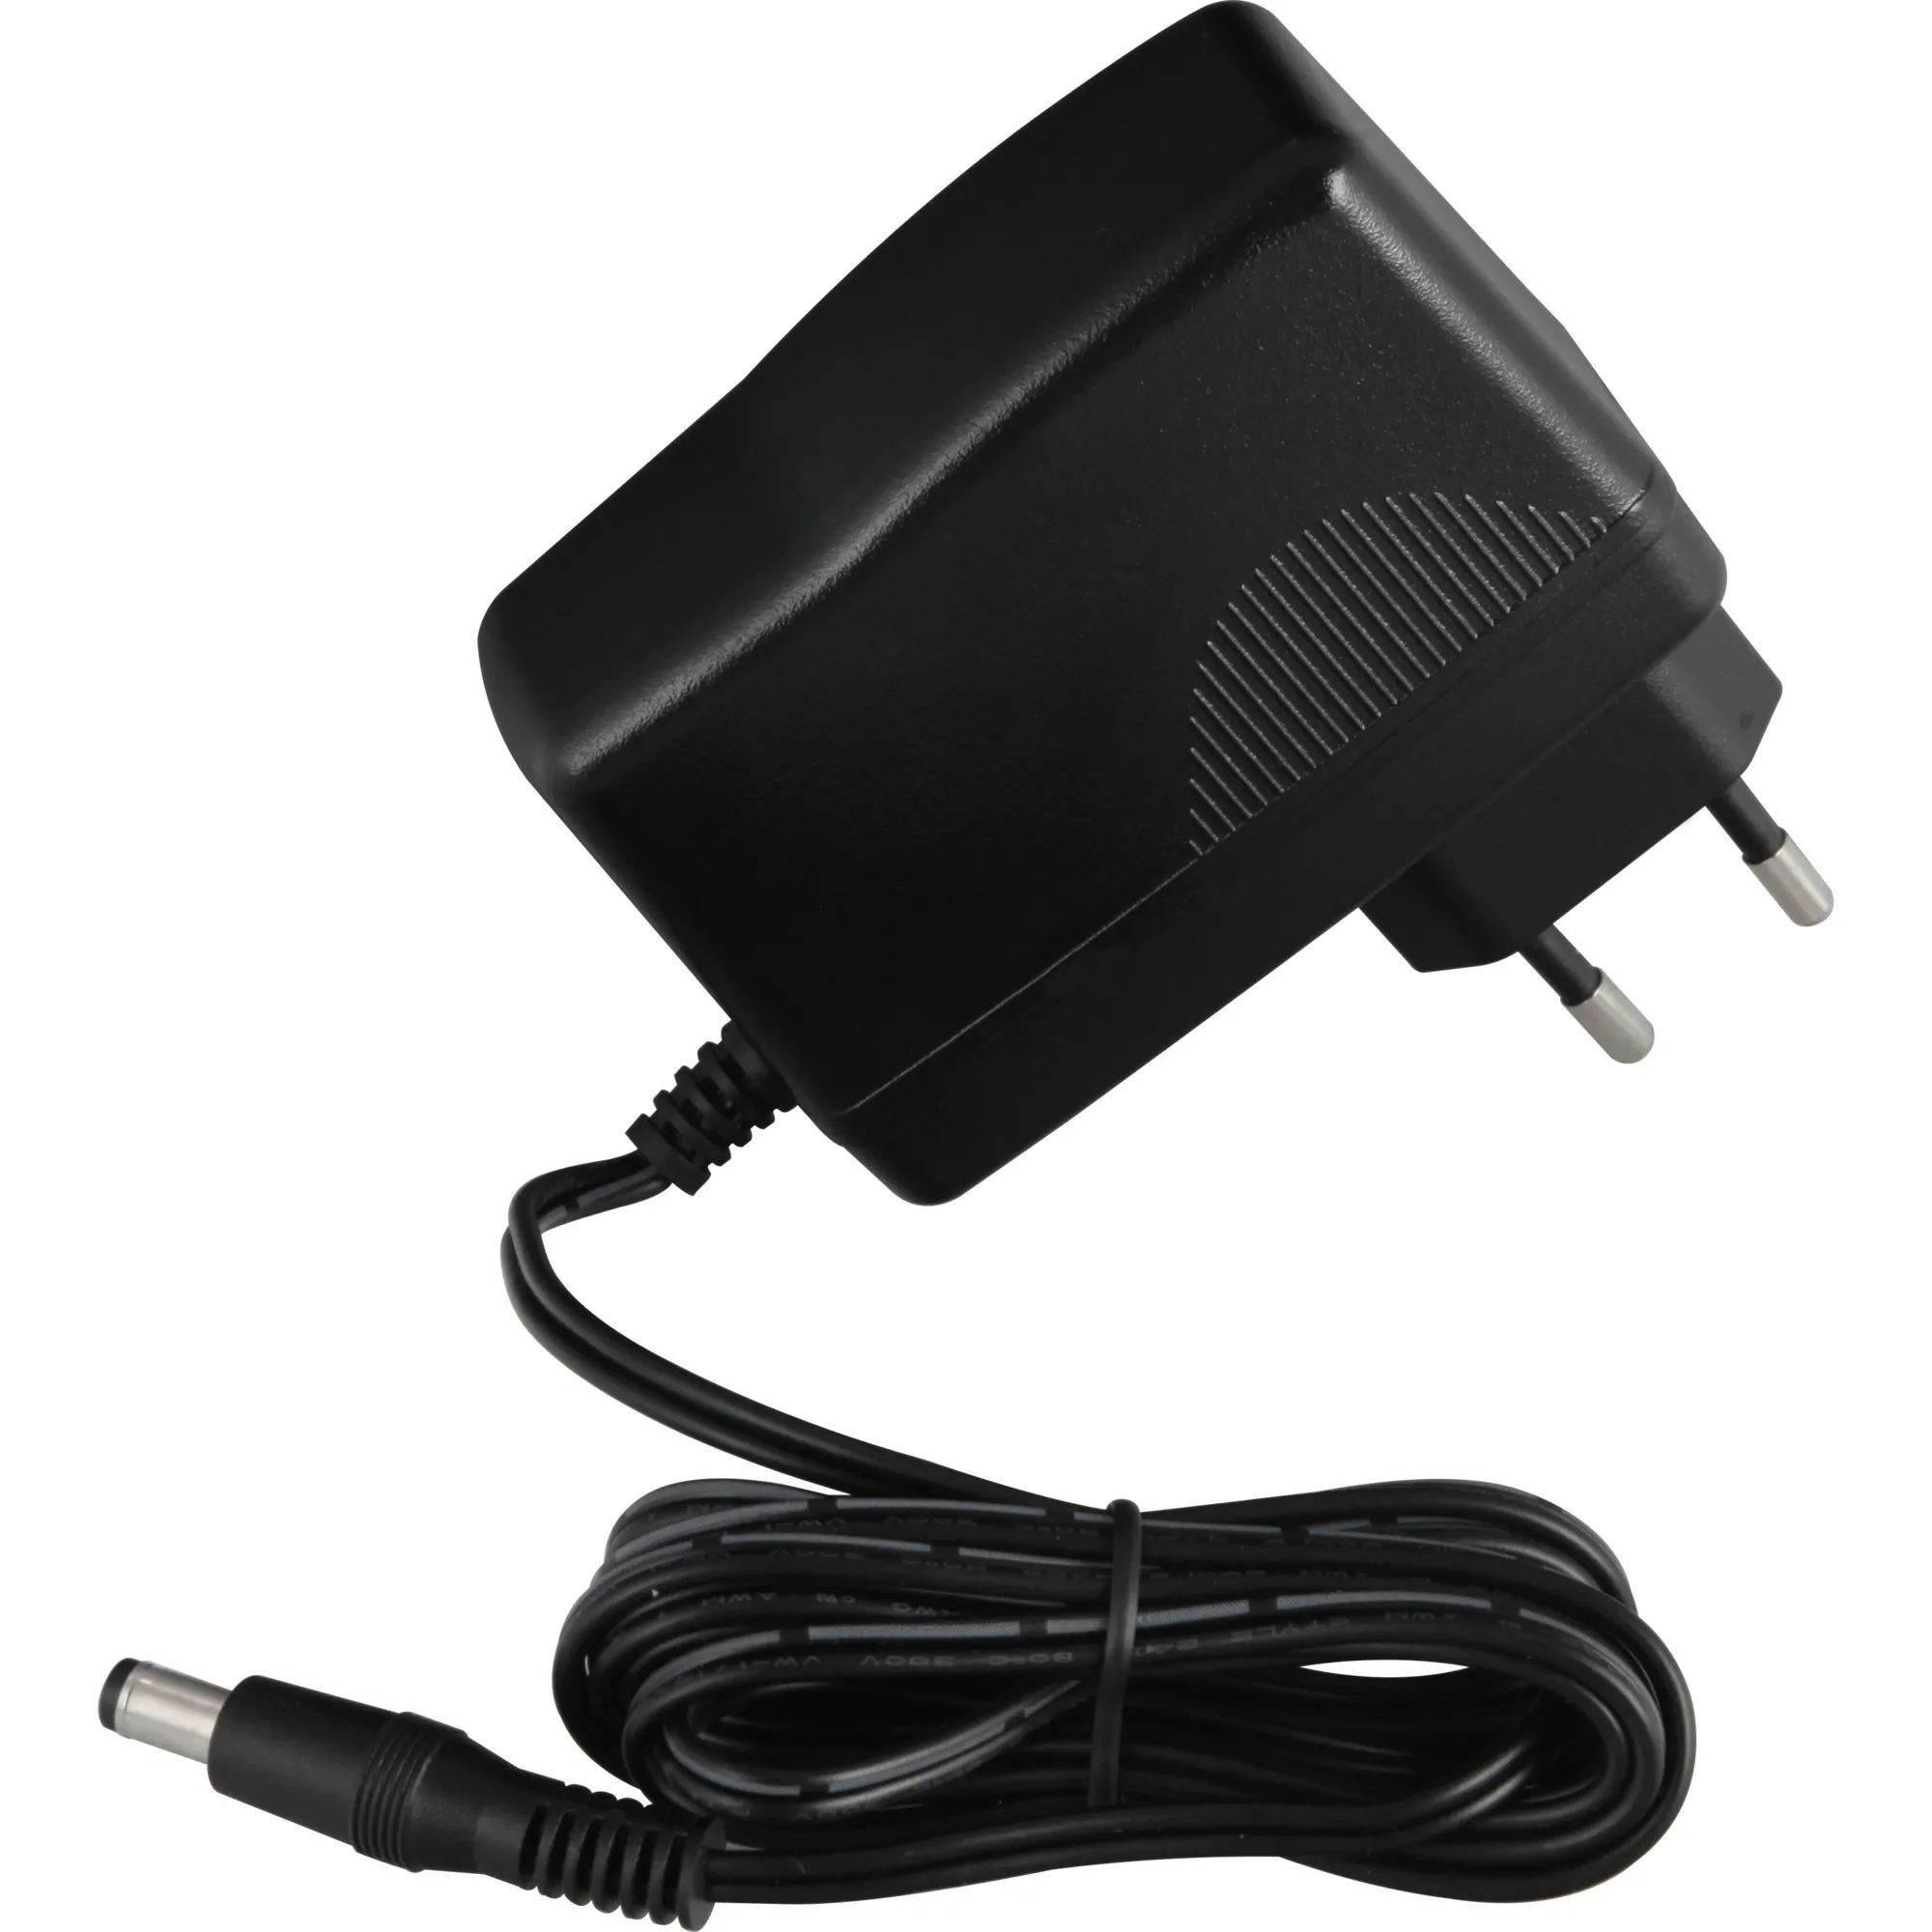  PAV12V AC/DC Power Adapter for Wireless-AC Access Points